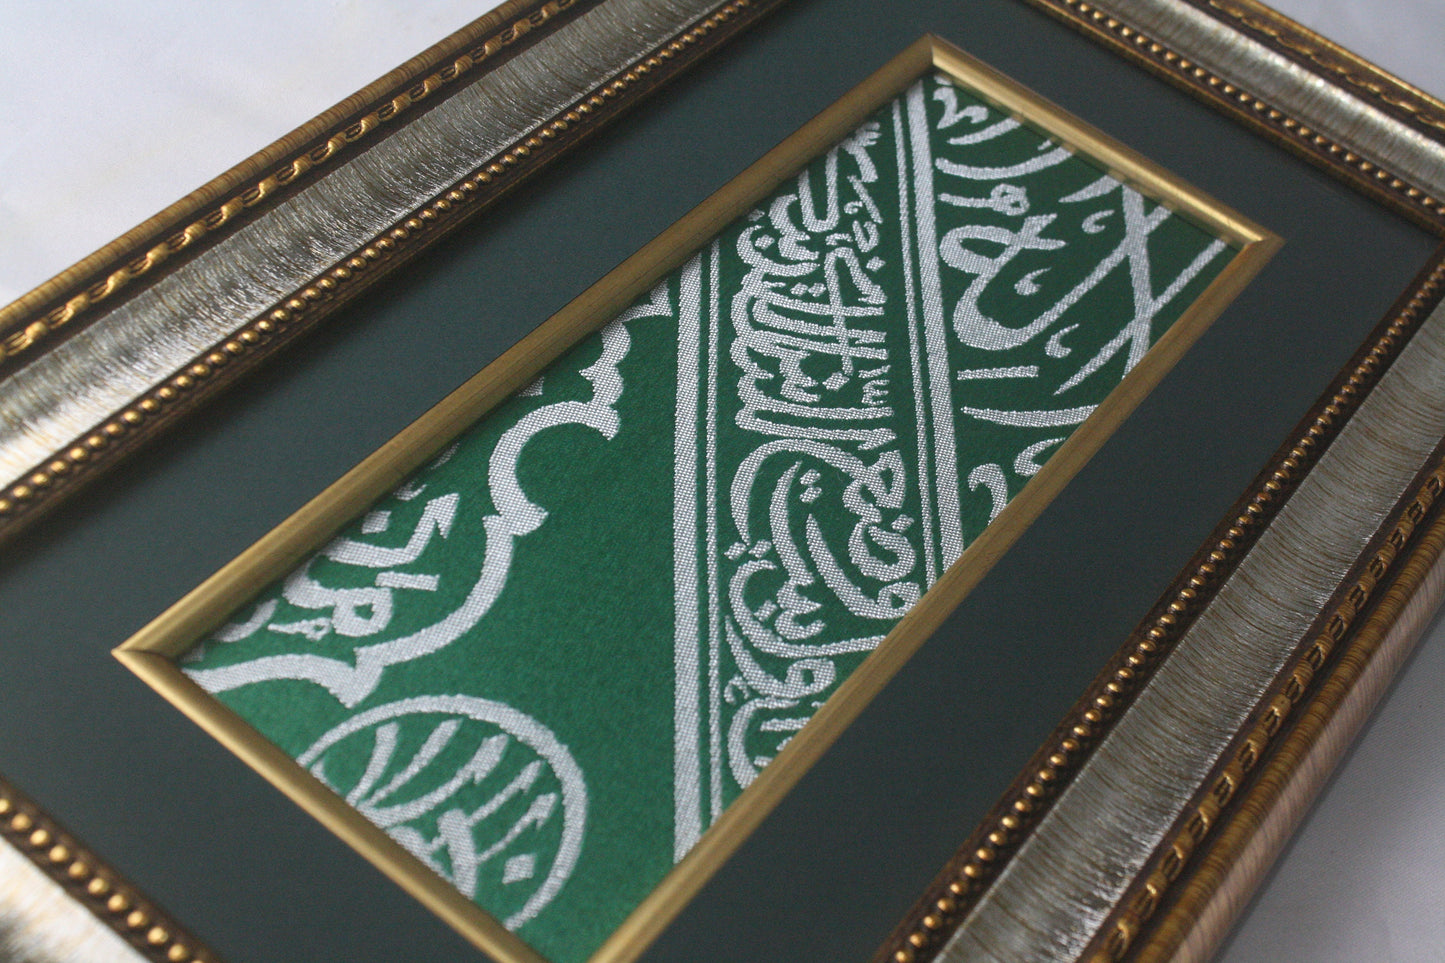 Islamic Unique Gift For Him /  Holy Kaaba Inside Cover Cloth Certified - Frame Islamic Relic - Beautiful Gift For Muslim Family